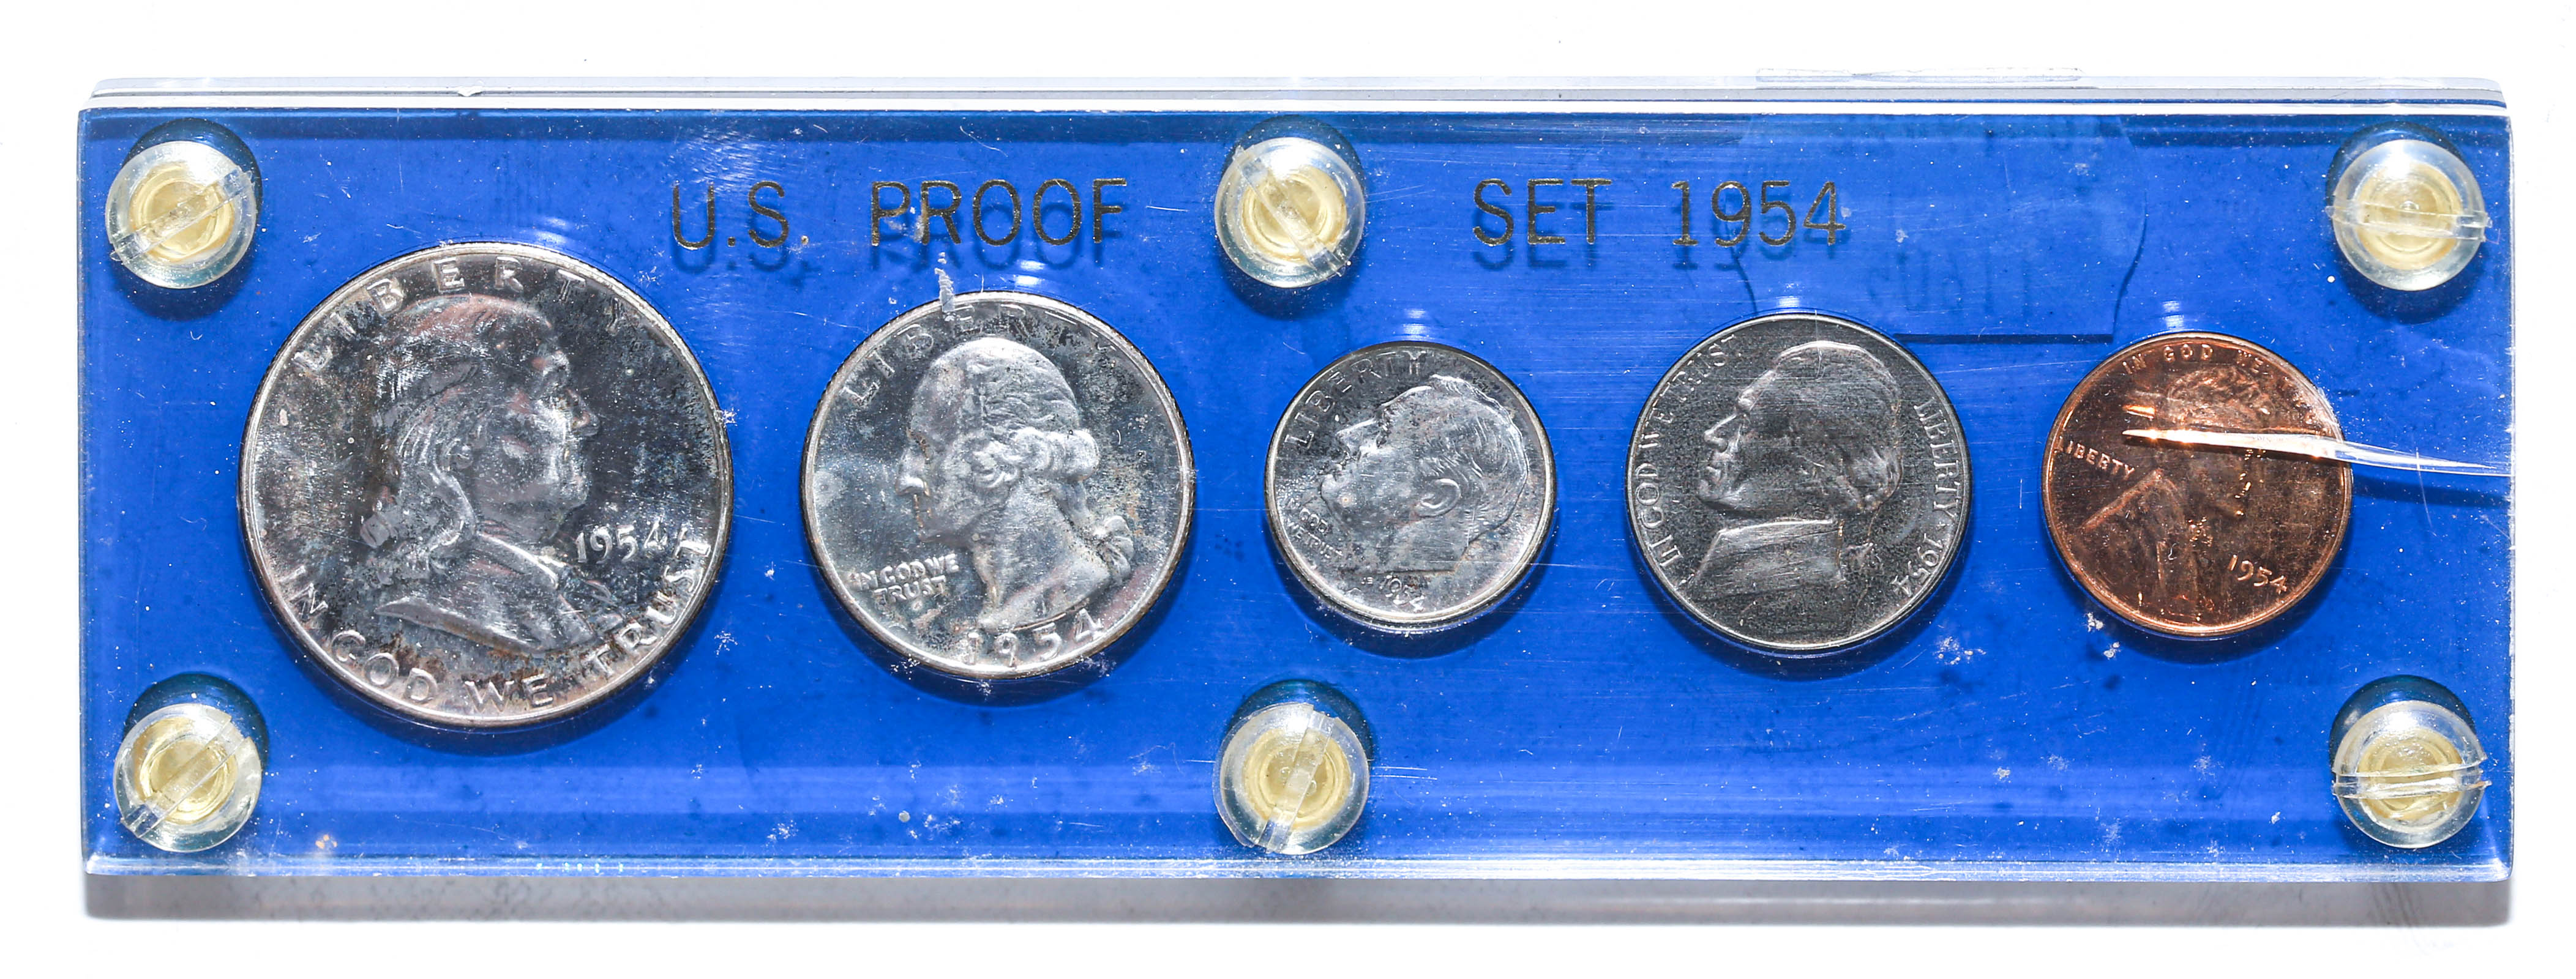 1954 US PROOF SET In a blue Capital 369d58